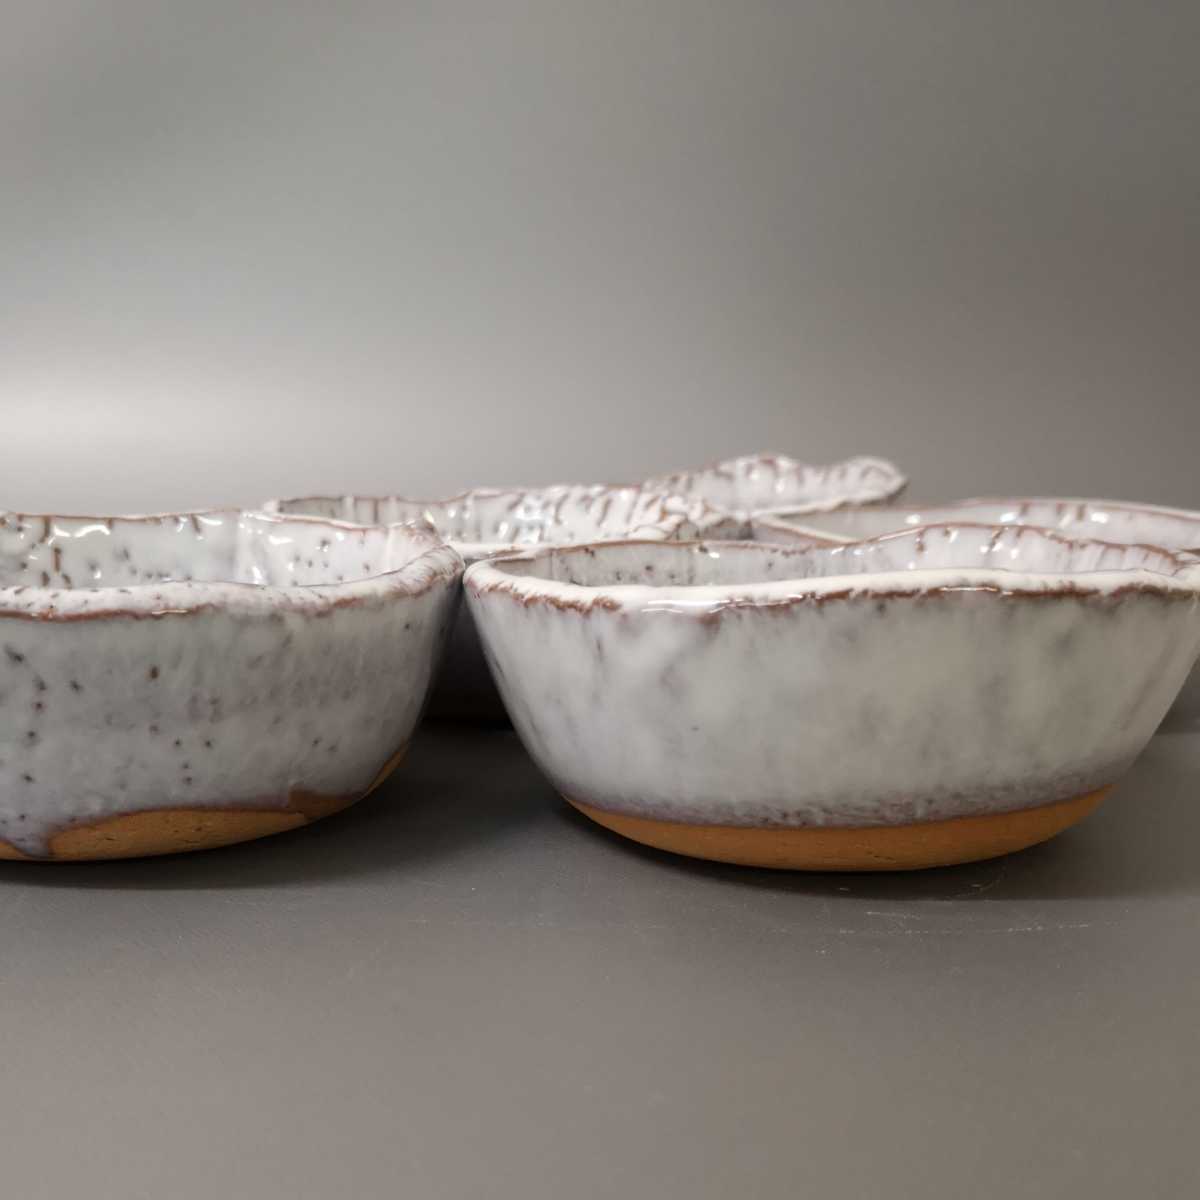 .53) Hagi .. pcs place kiln white Hagi small bowl deep plate saucepan taking . plate also [5 customer ] unused new goods including in a package welcome 